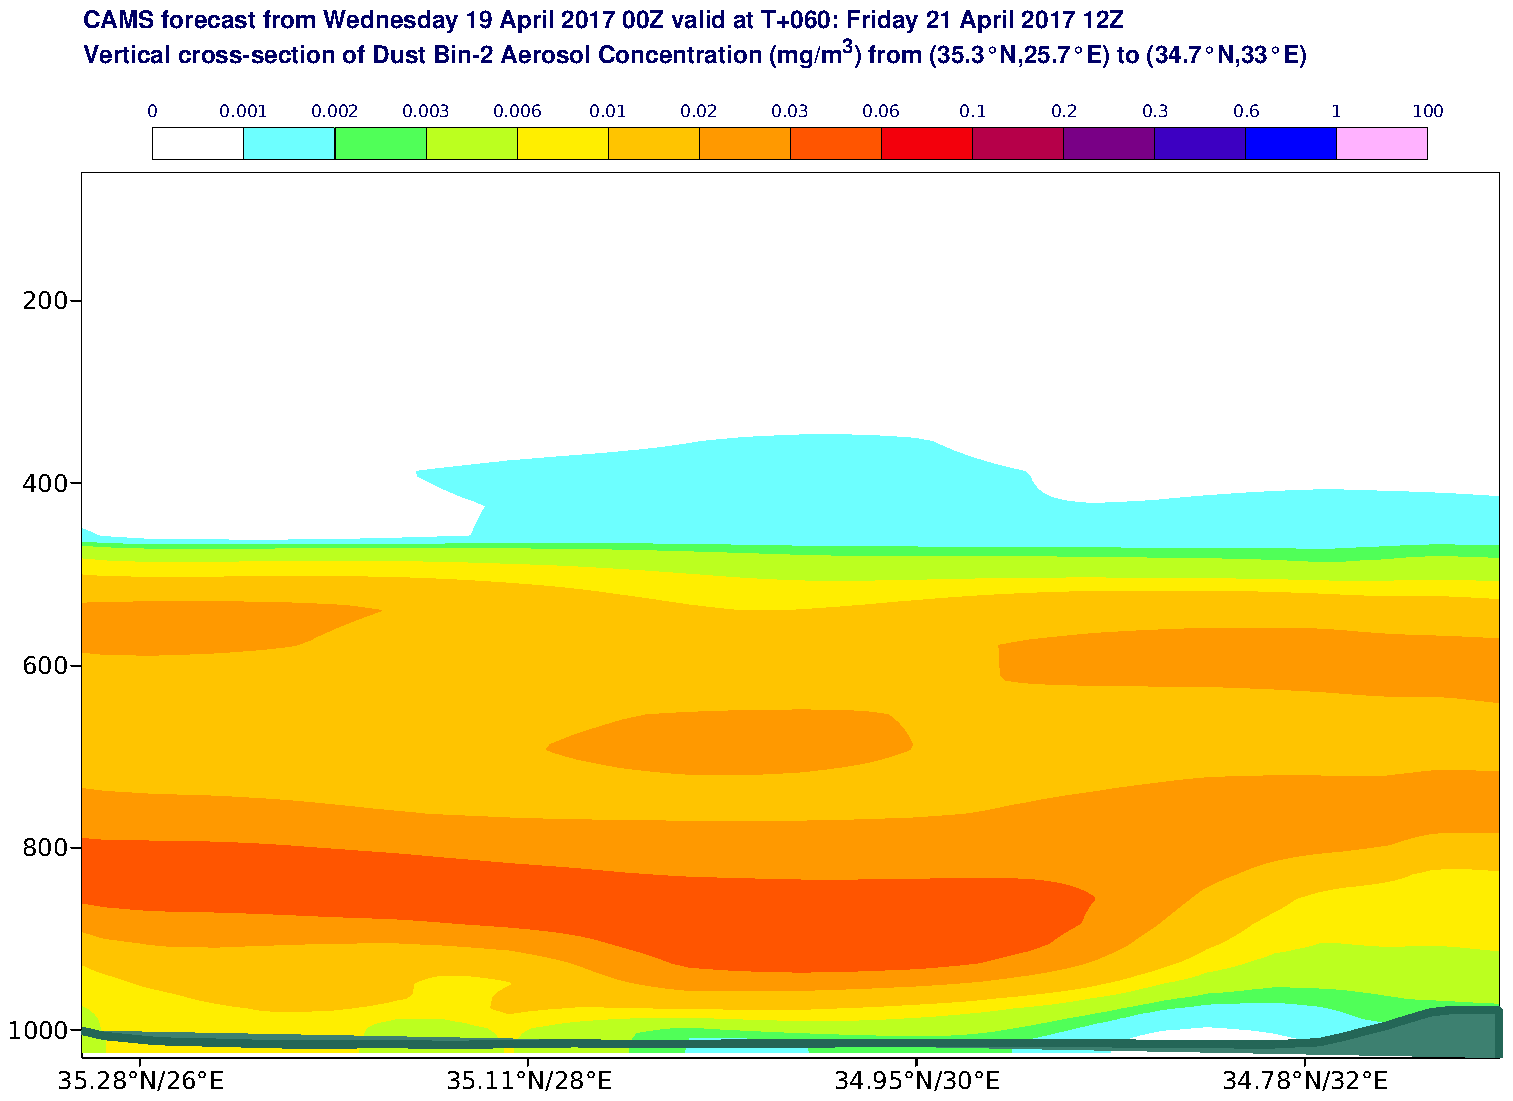 Vertical cross-section of Dust Bin-2 Aerosol Concentration (mg/m3) valid at T60 - 2017-04-21 12:00